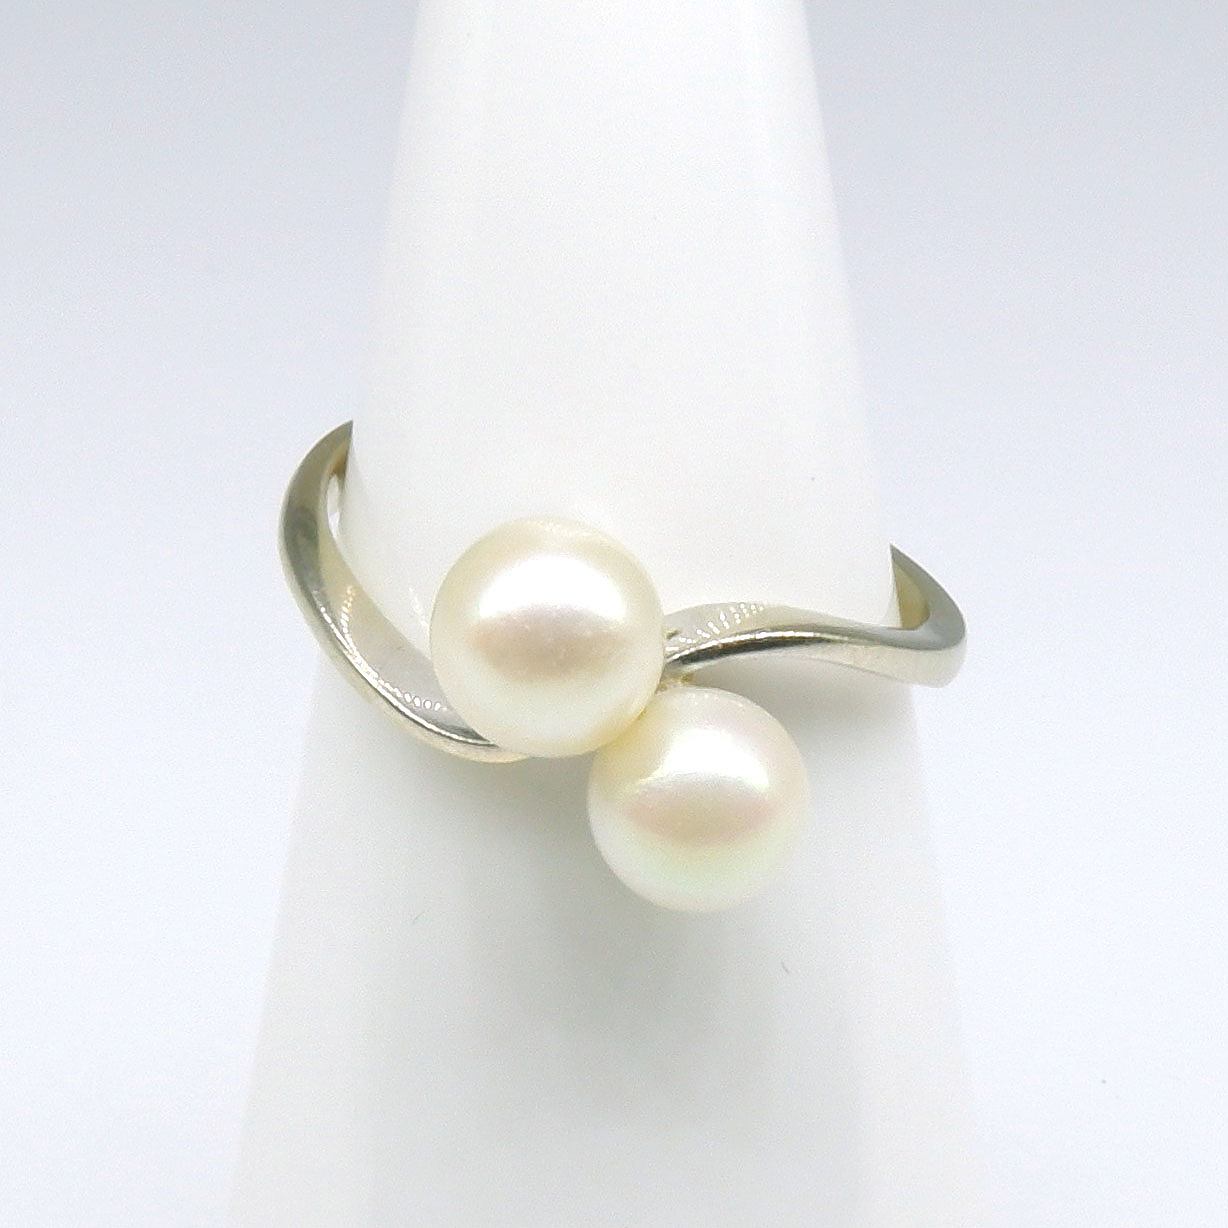 '18ct White Gold and Cultured Pearl Ring'